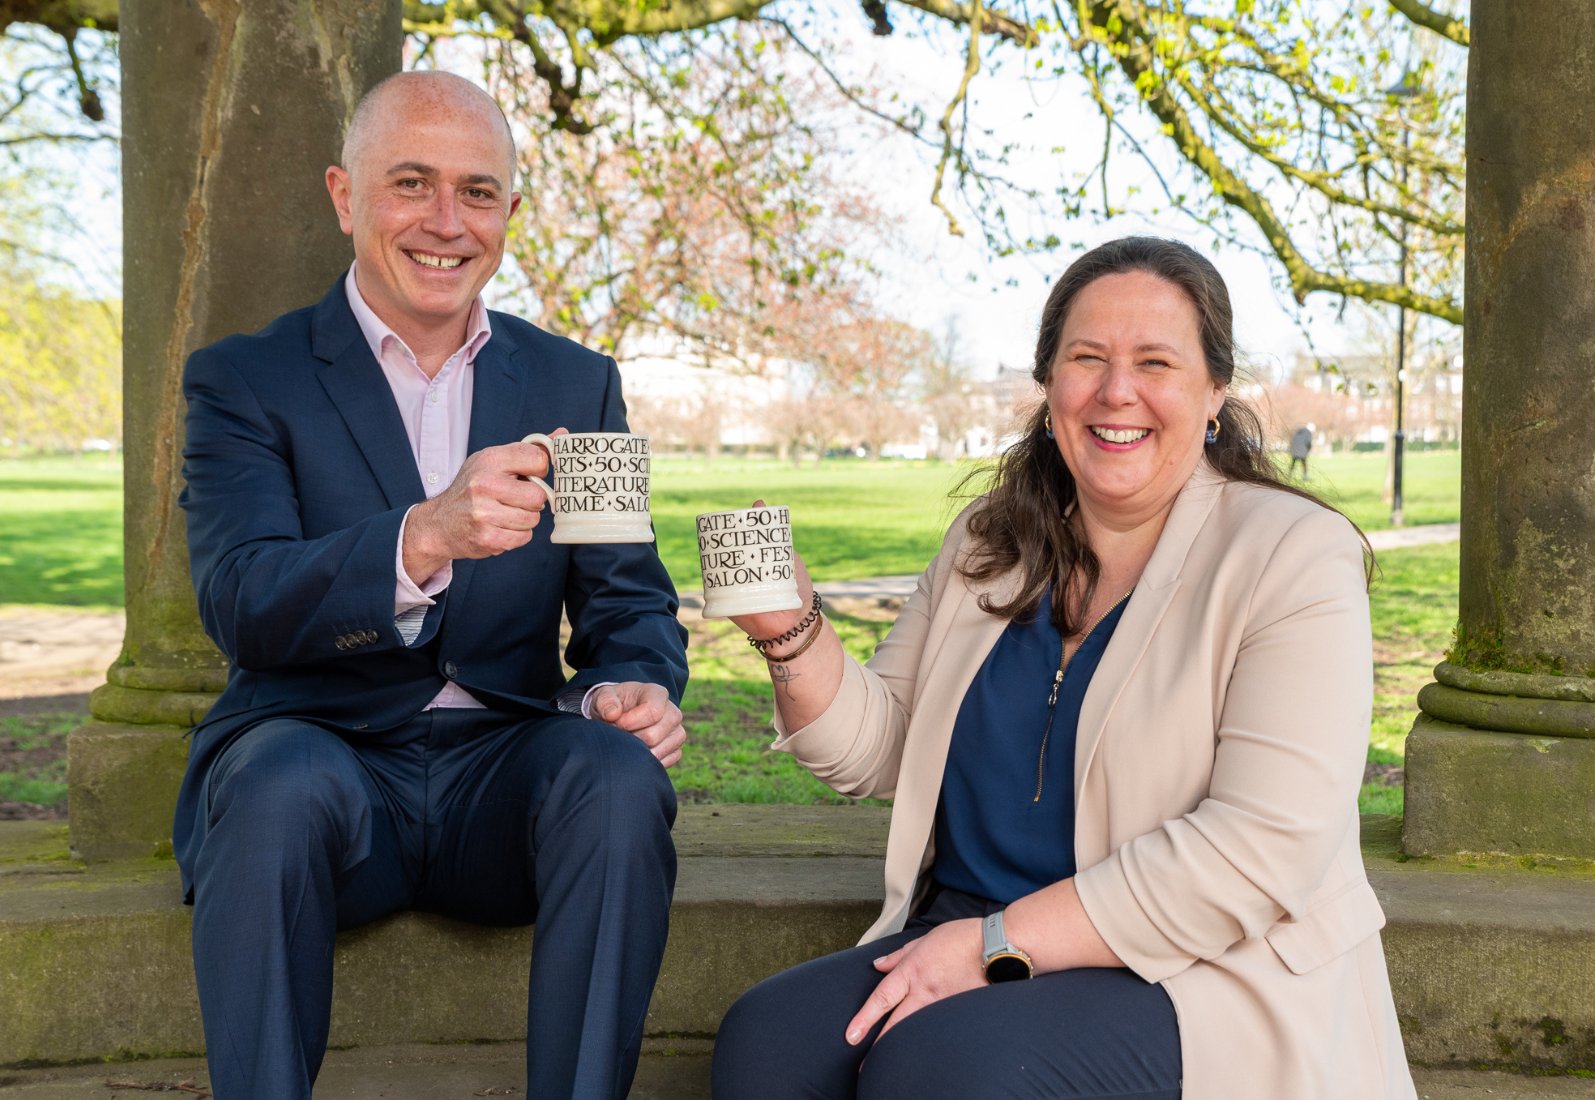 Sharon Canavar, Chief Executive of Harrogate International Festivals, with Andrew Meehan, Managing Director of Harrogate Family Law